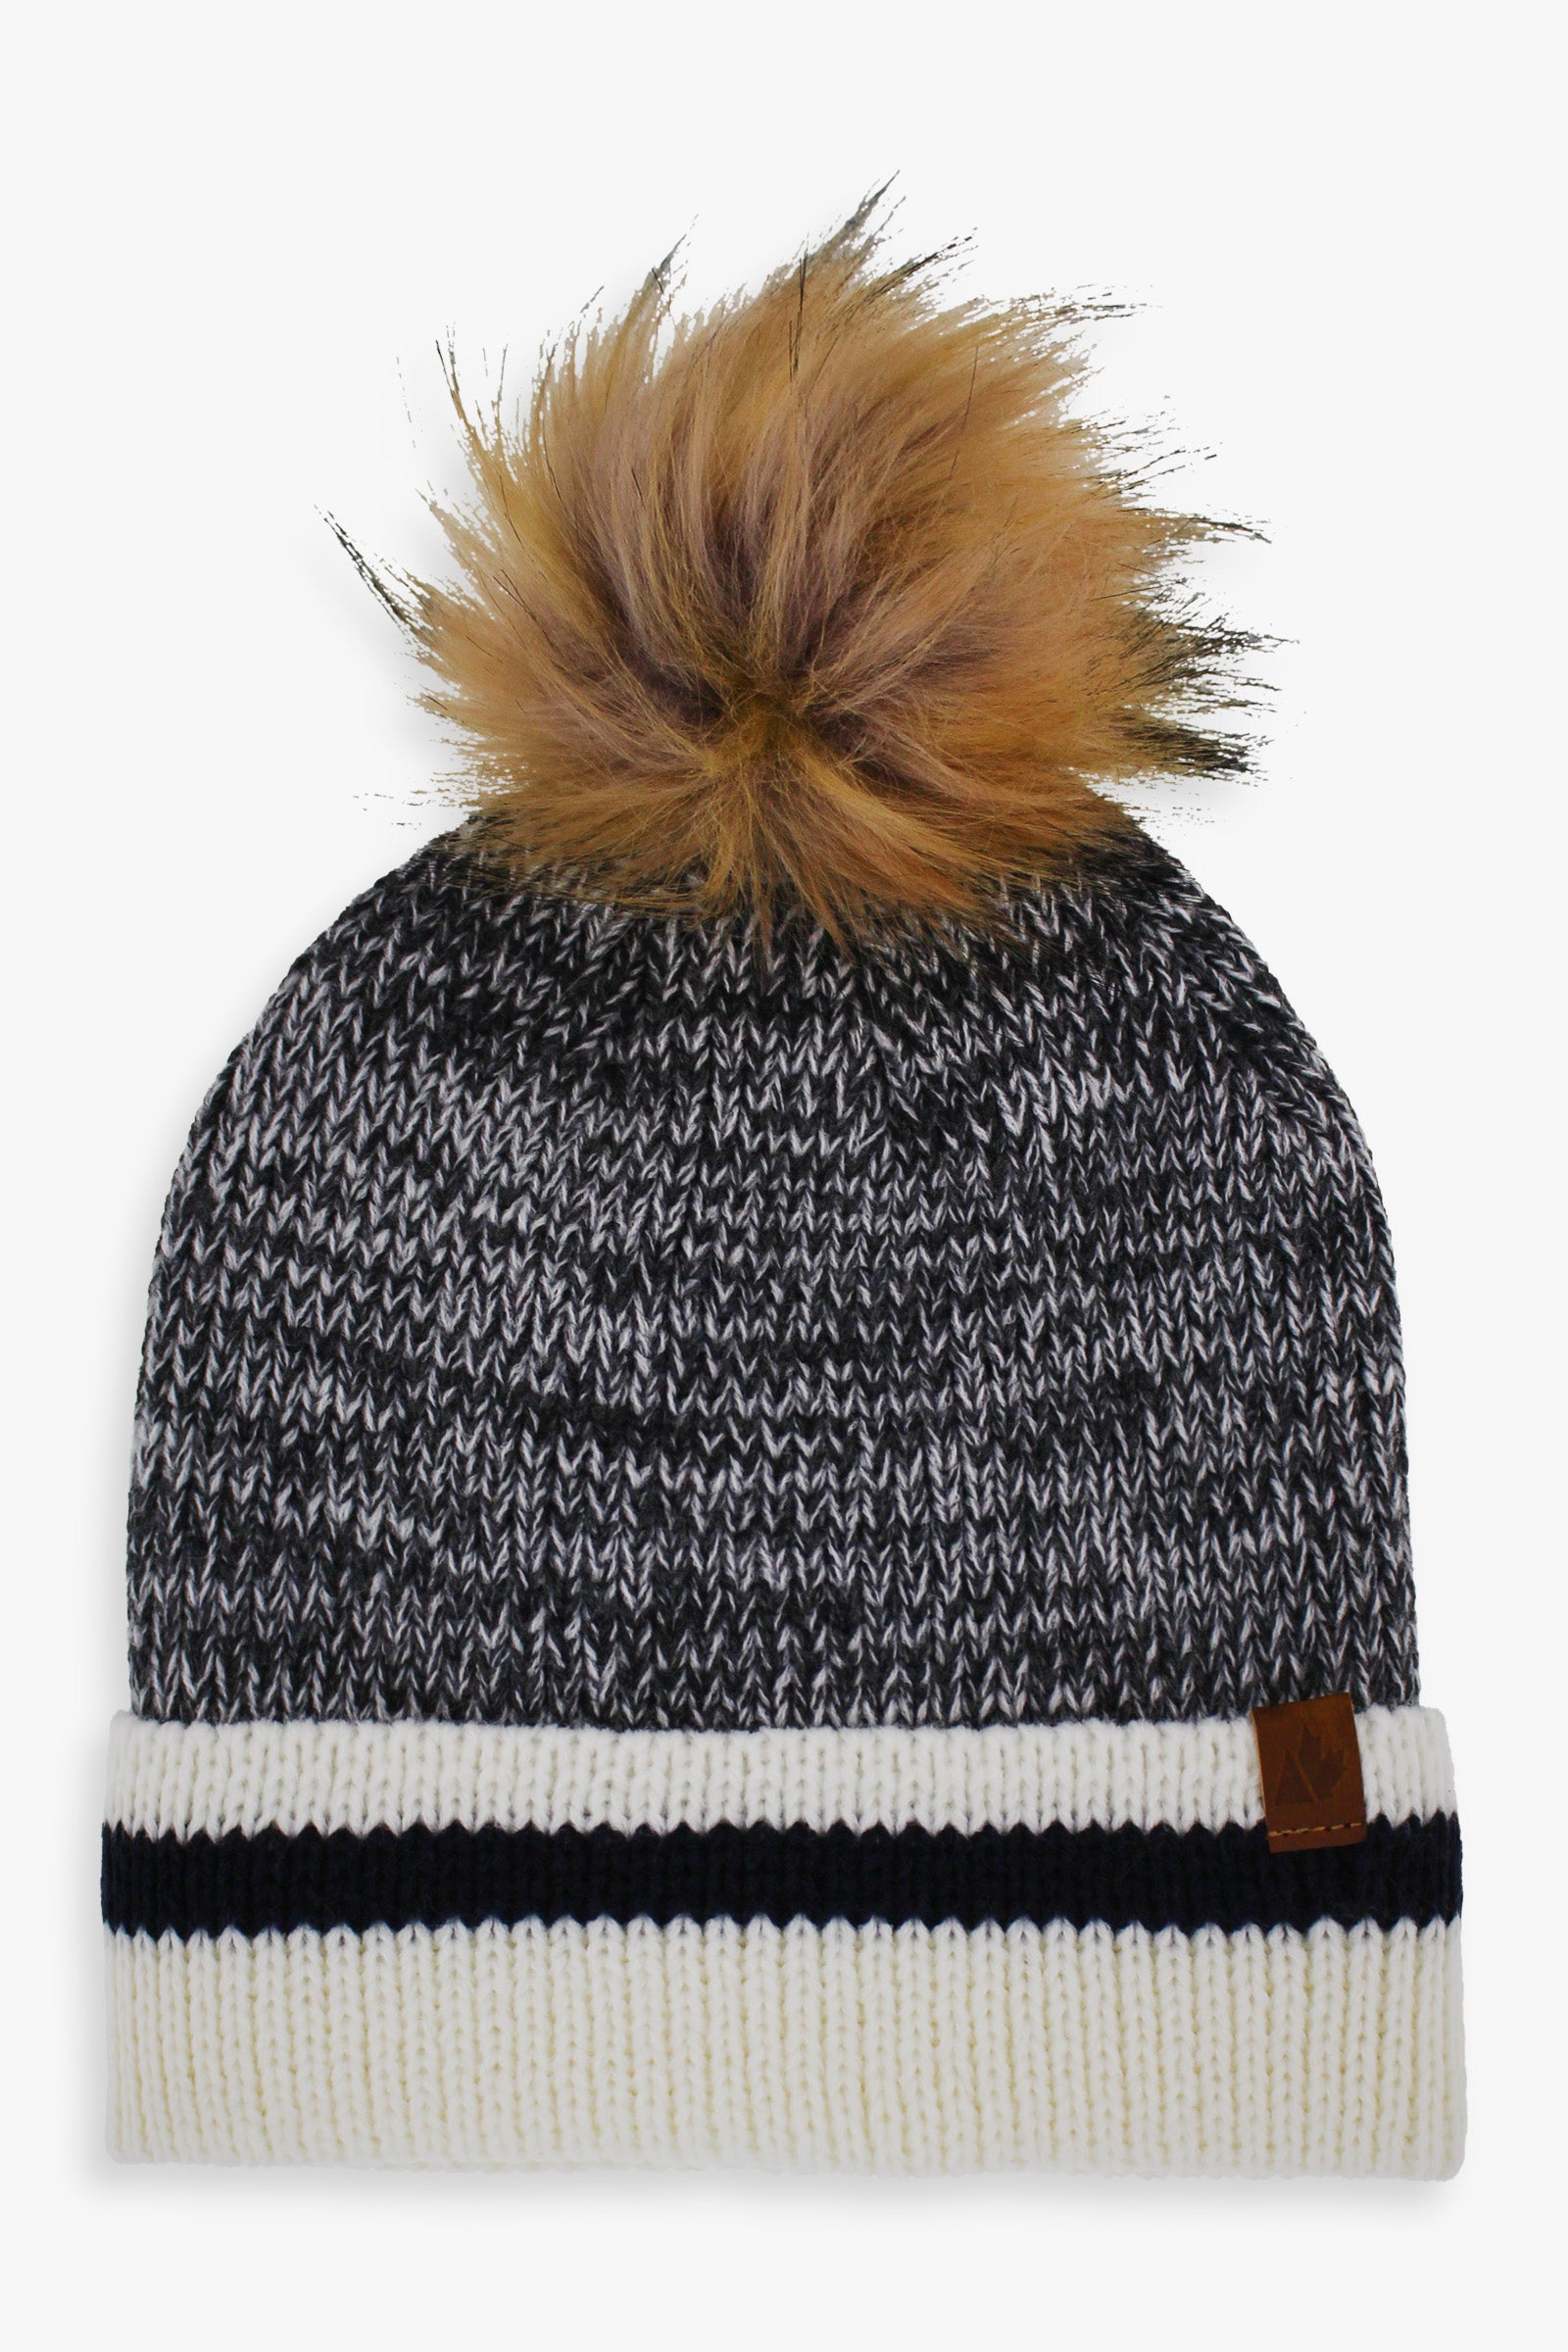 Adult Unisex Fleece Lined Toque With Faux Fur Pom